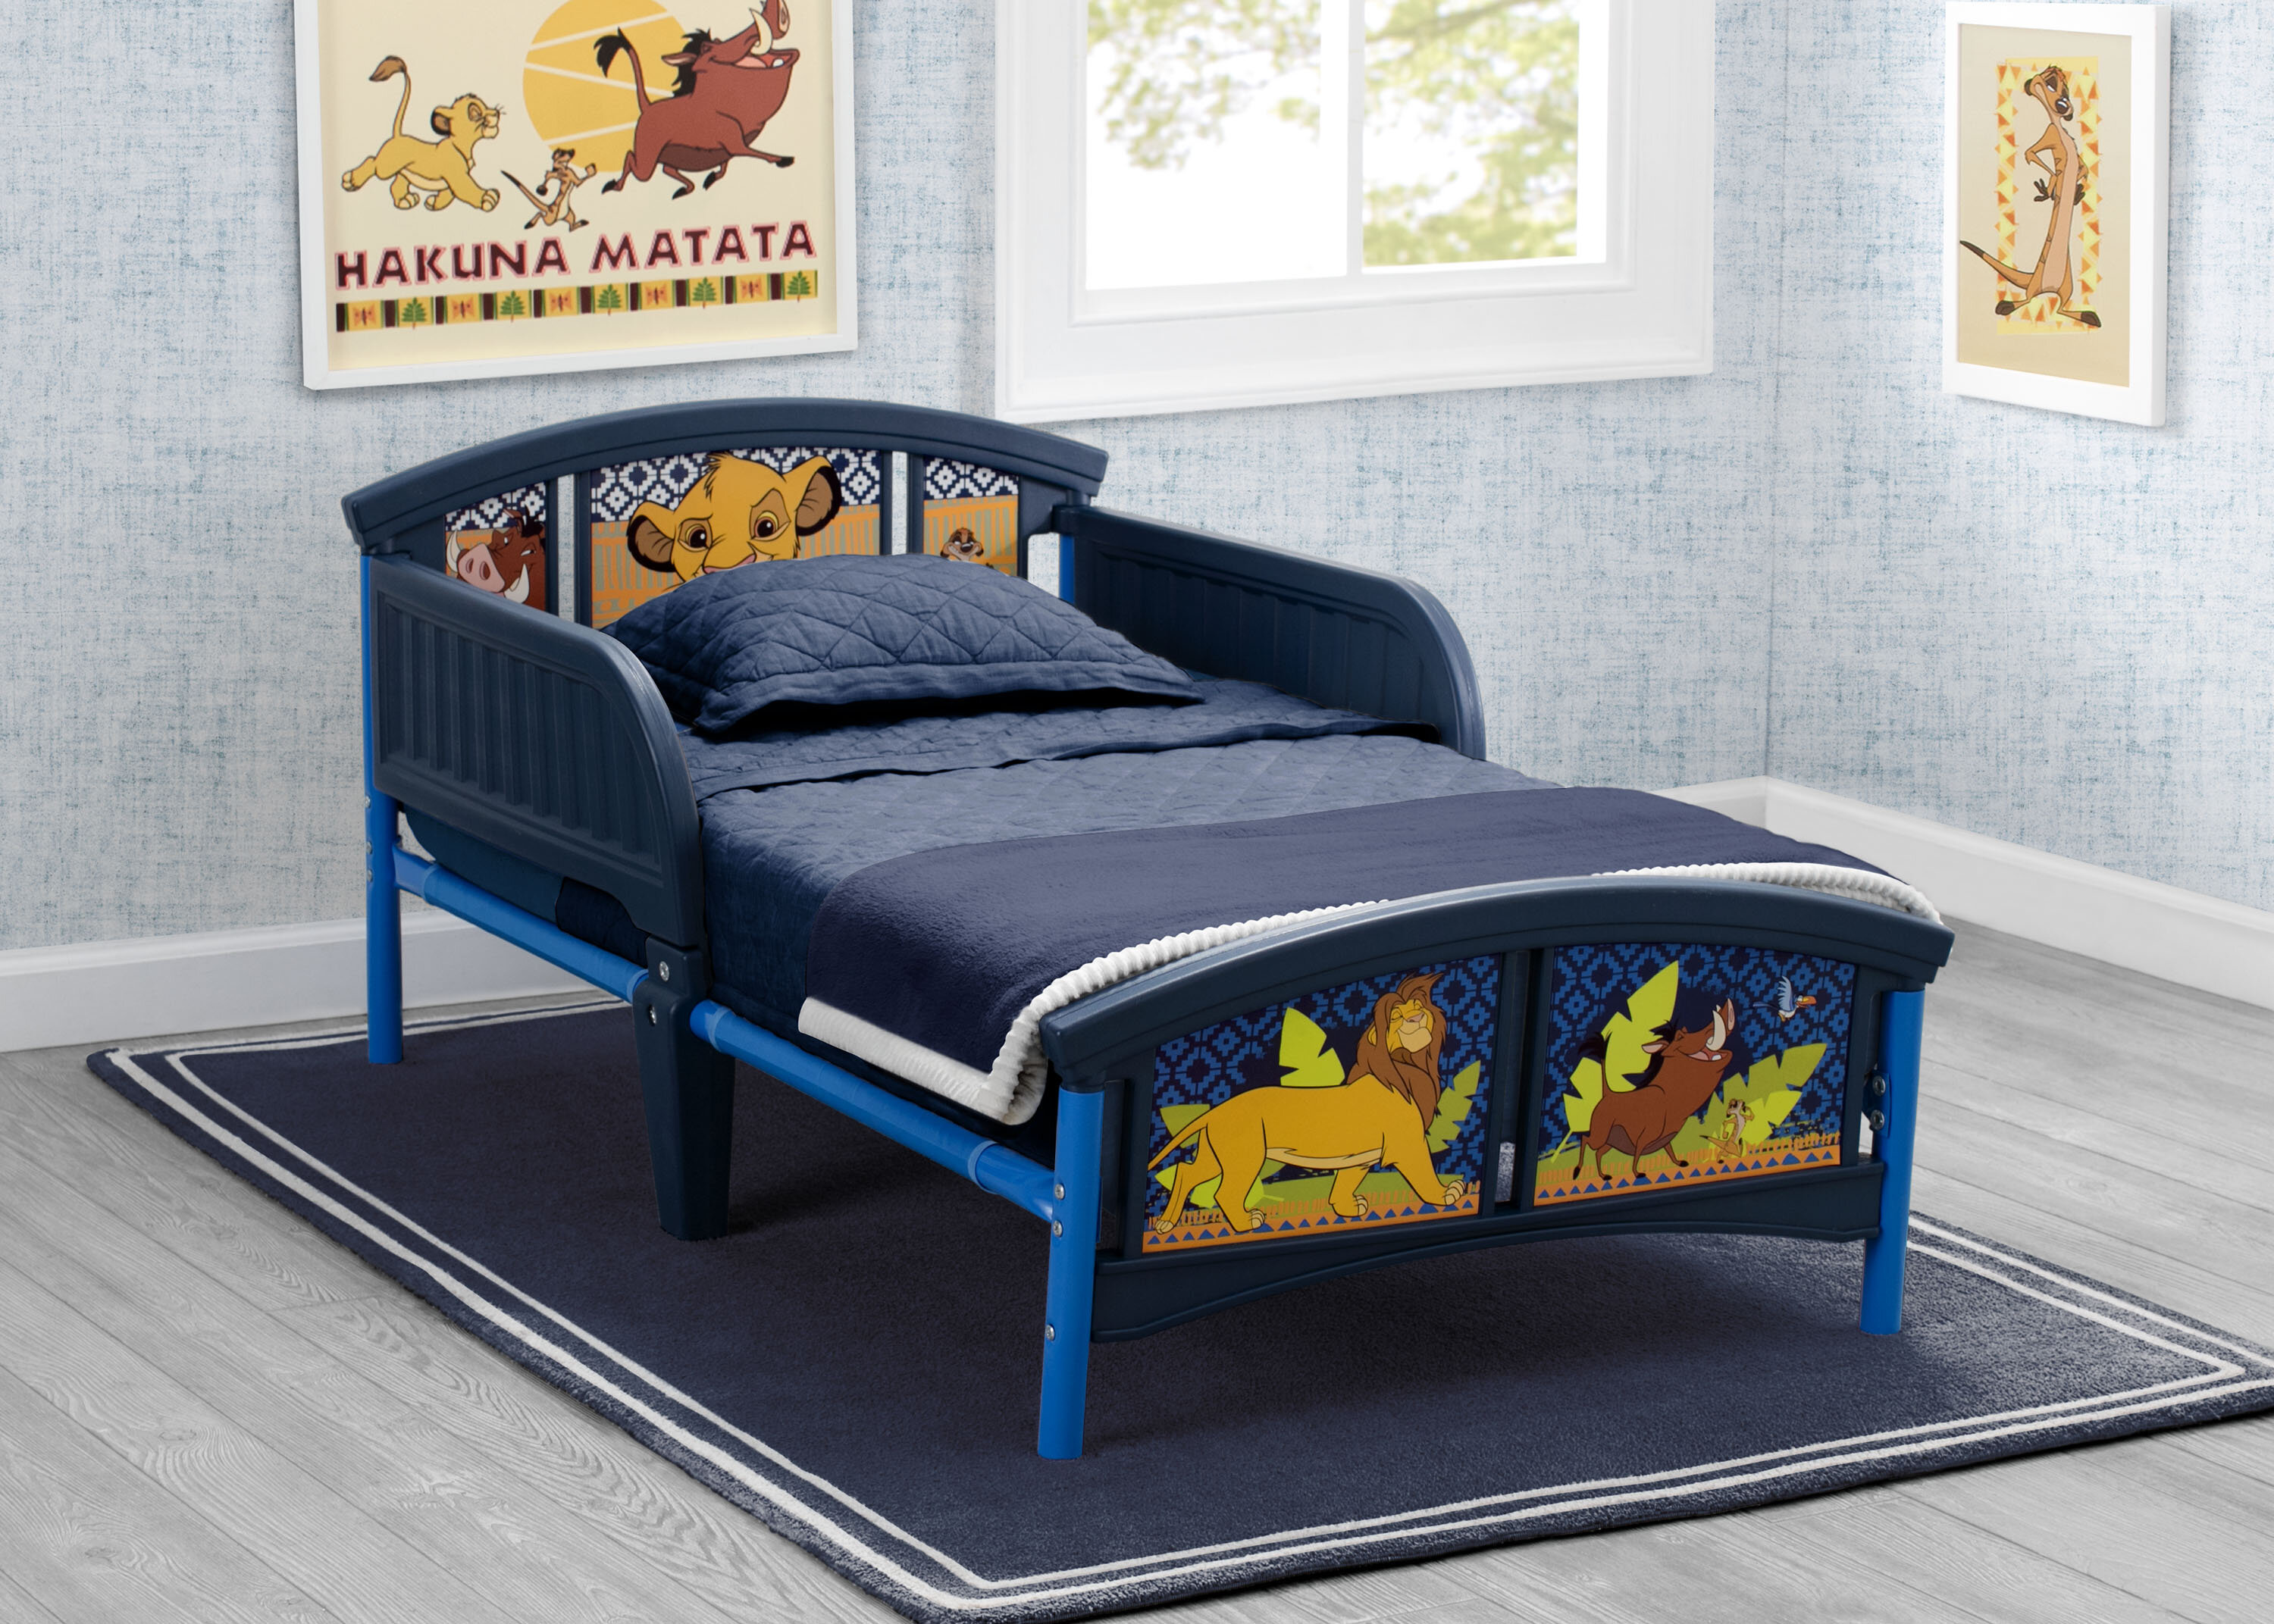 plastic beds for toddlers